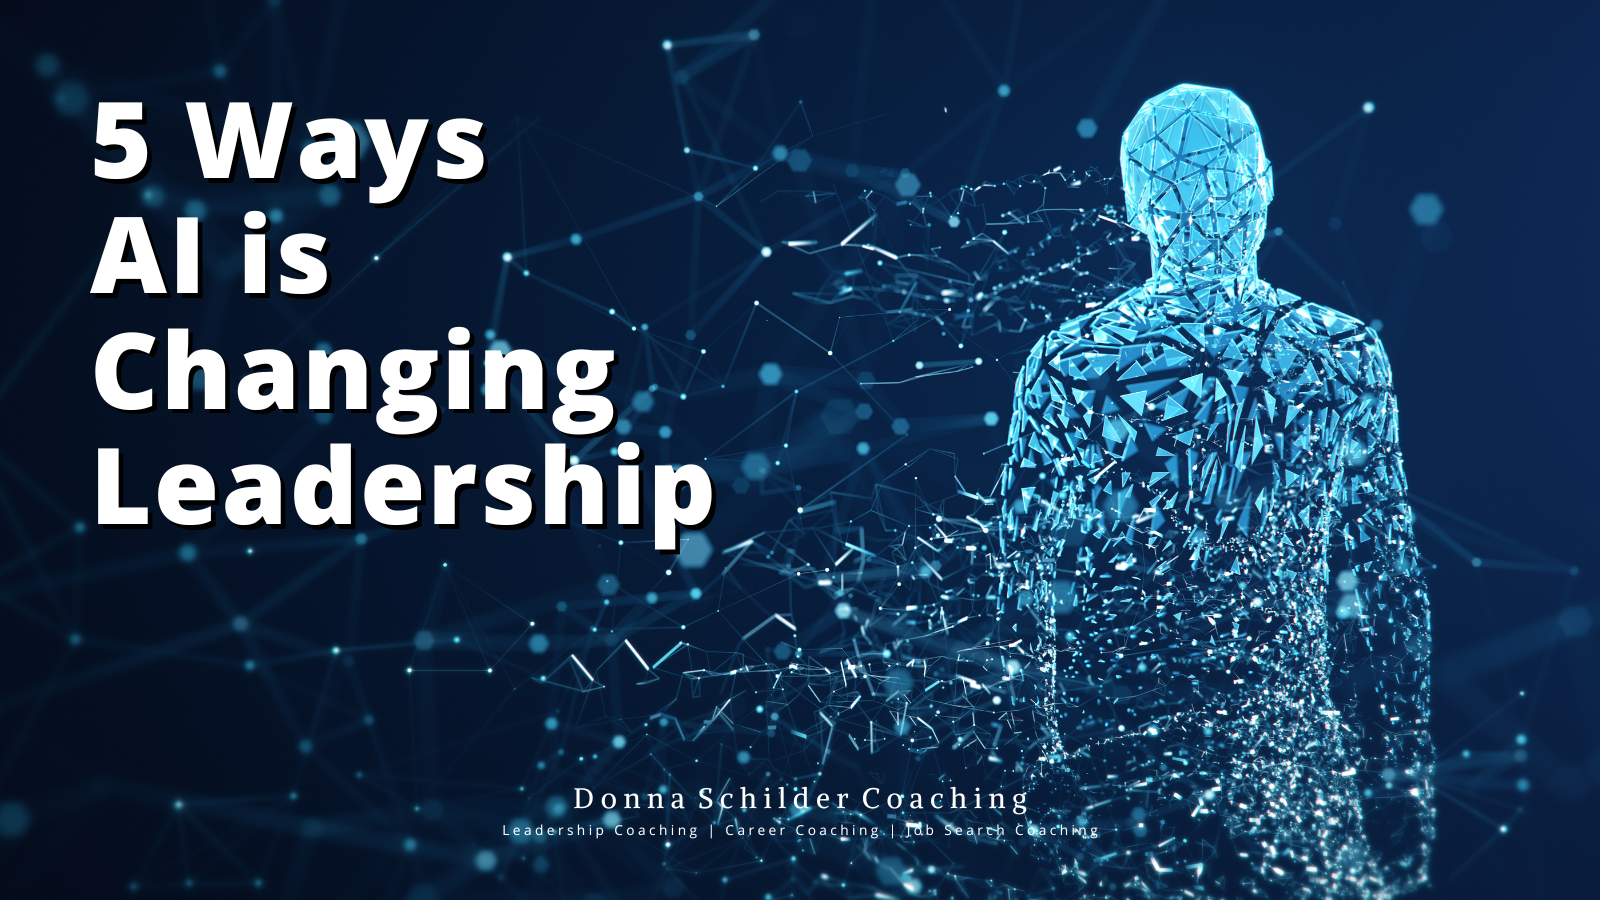 5 Ways AI is Changing Leadership